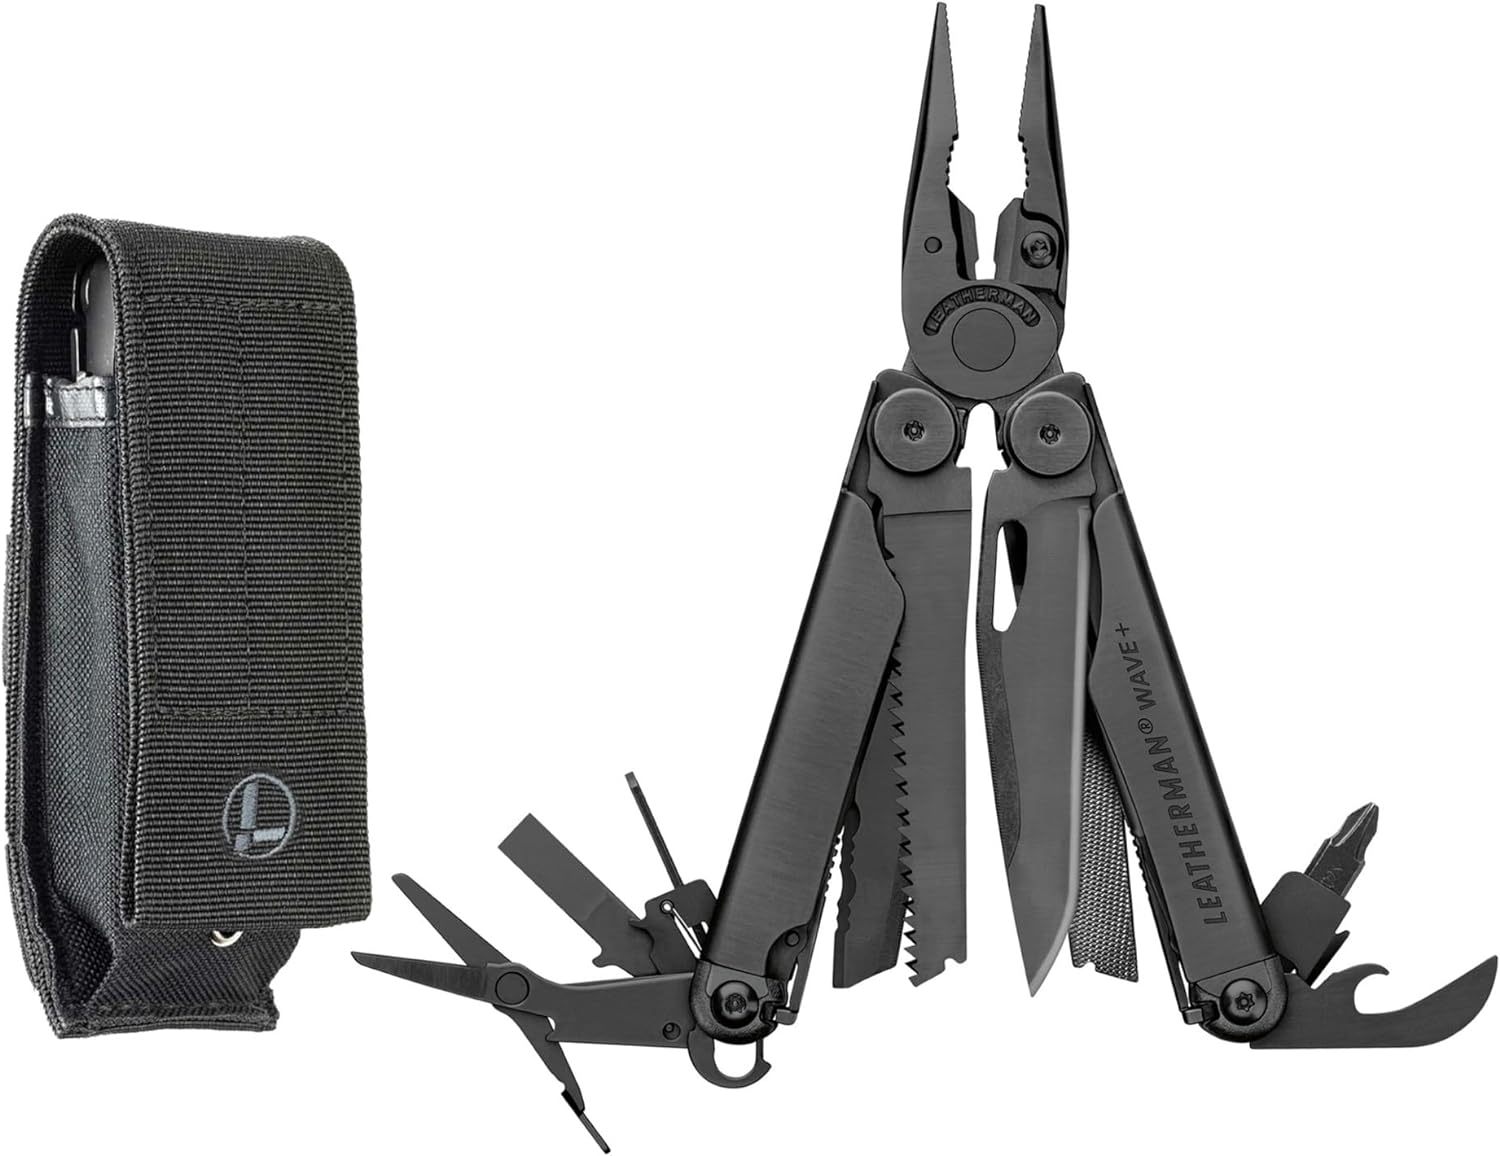 LEATHERMAN, Wave+, 18-in-1 Full-Size, Versatile Multi-tool for DIY, Home, Garden, Outdoors or Everyday Carry (EDC), Black